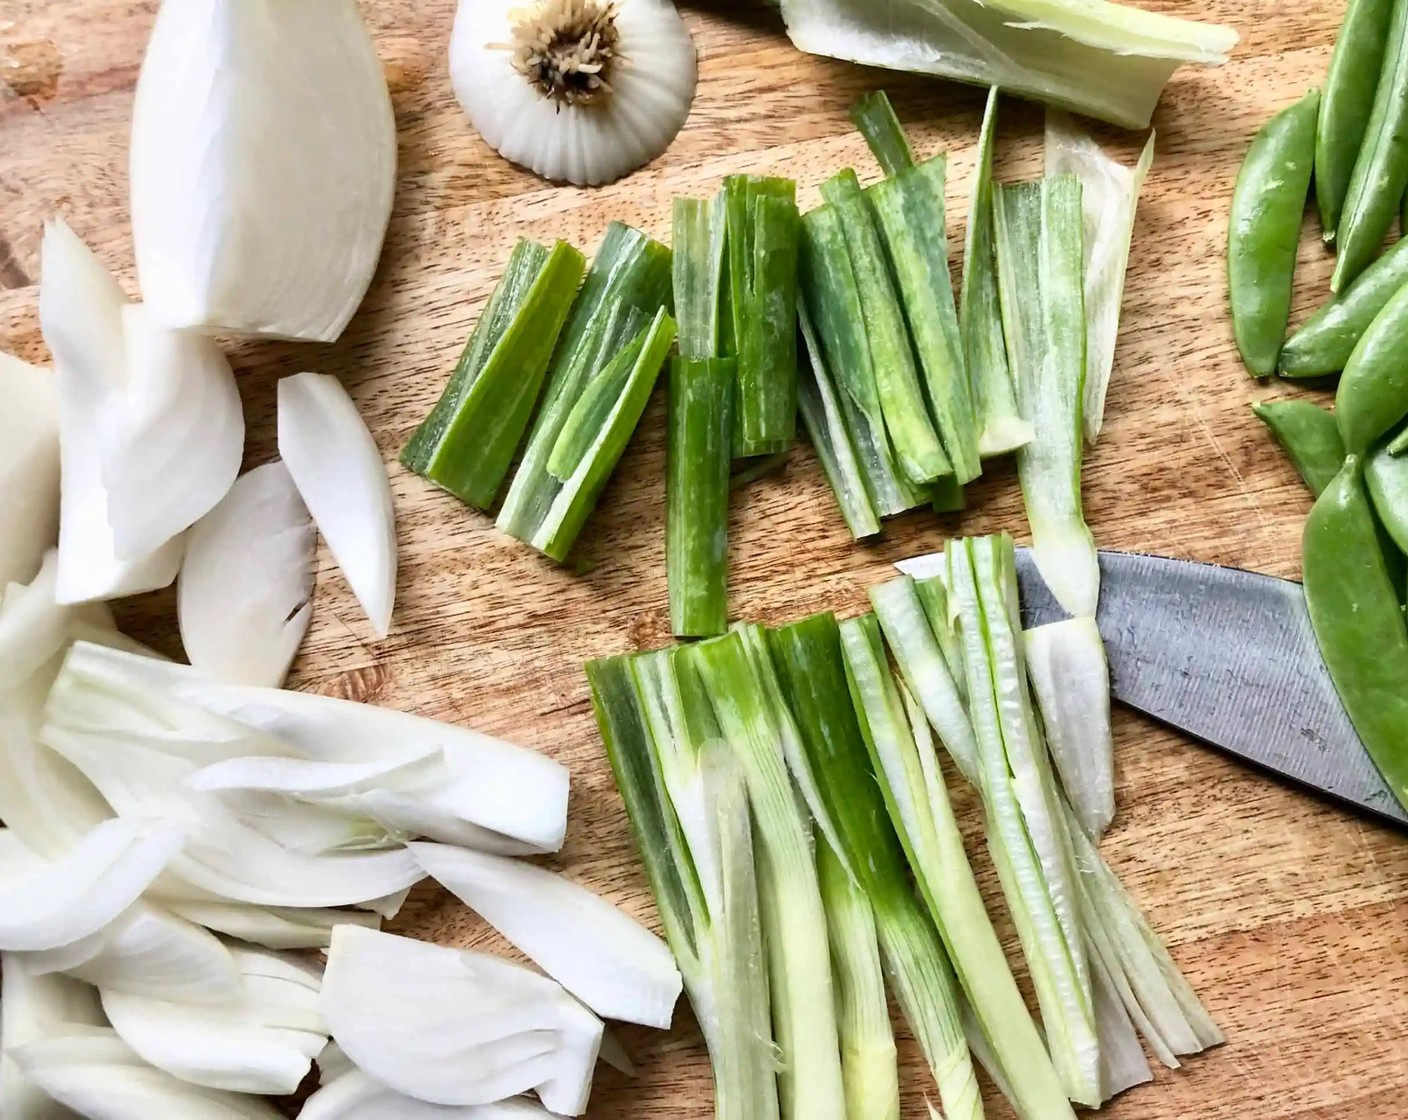 step 7 Separate the Spring Onions (7 1/2 cups) stems from the bulbs. Cut the stems in half lengthwise, then cut crosswise into 2-inch pieces. Slice the bulbs through the root end into quarters. If your spring onions are very large, the bulbs will need to be further cut into more manageable pieces.